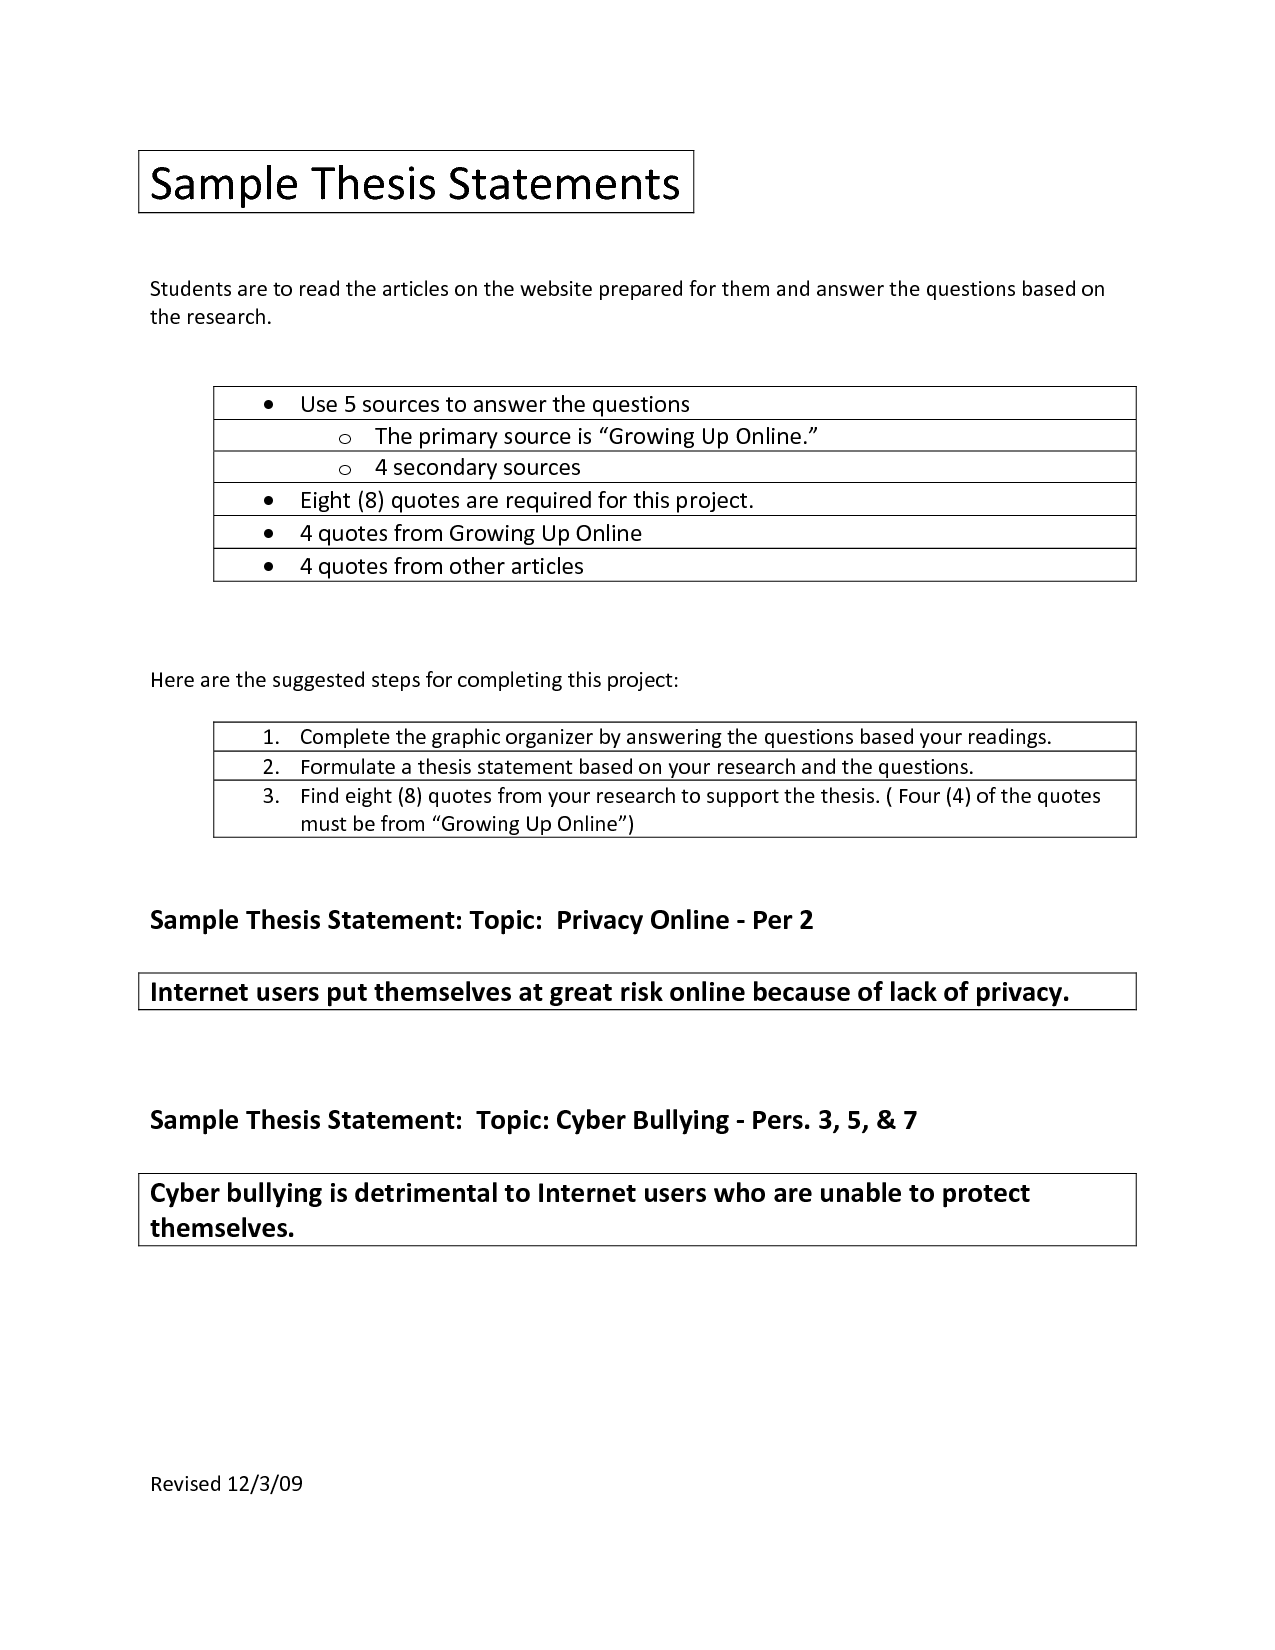 PhD Thesis Statement for Research Scholars | Dissertation Statements